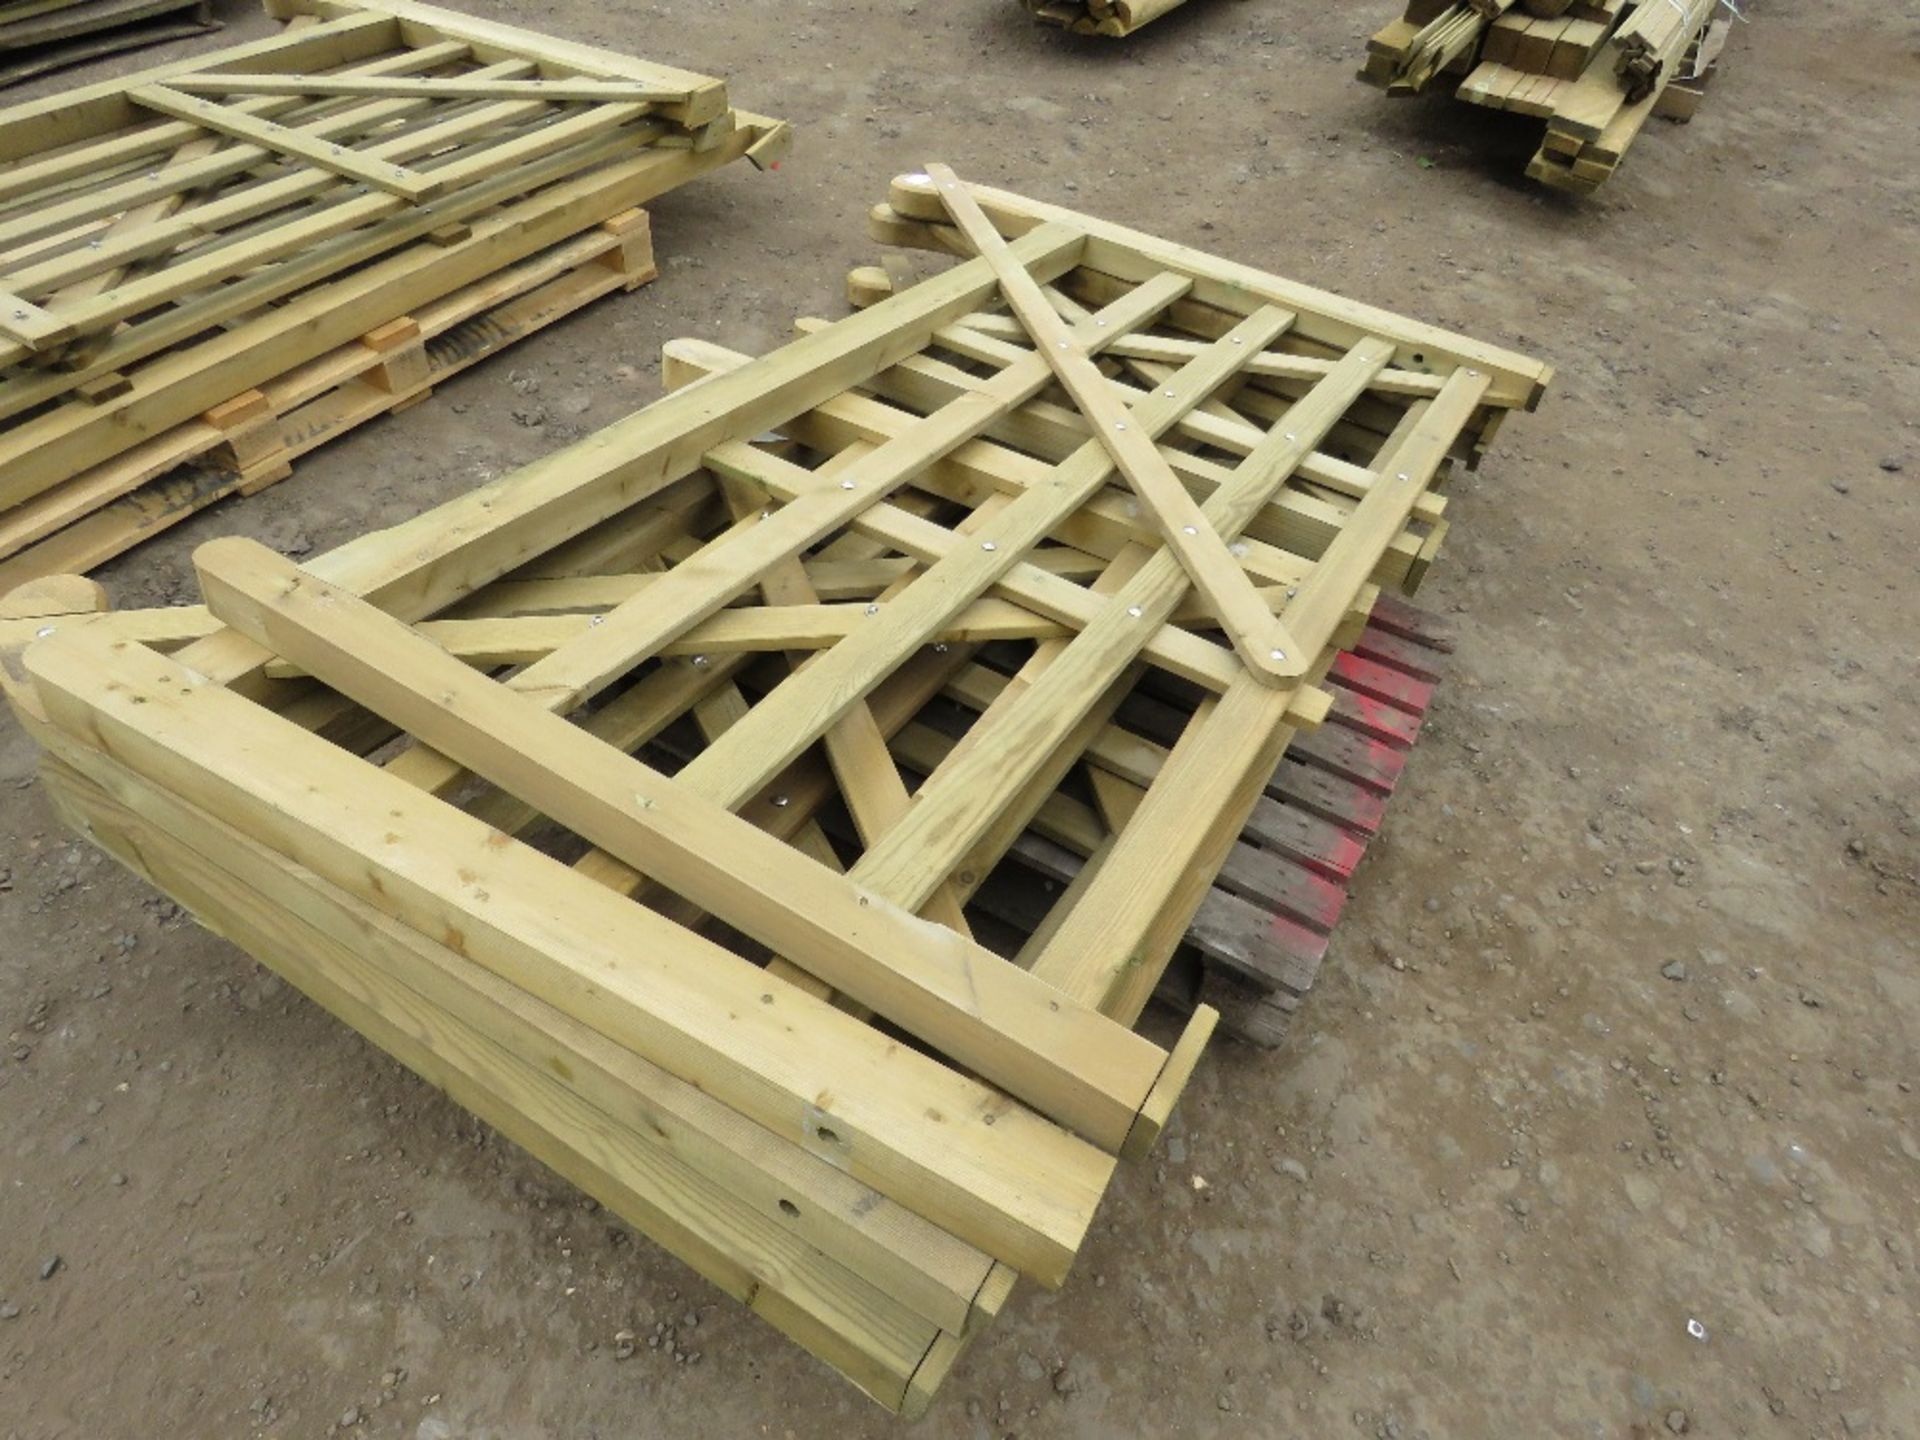 5 X ASSORTED SIZED WOODEN FIELD/DRIVEWAY GATES, AS SHOWN IN IMAGES - Image 4 of 6